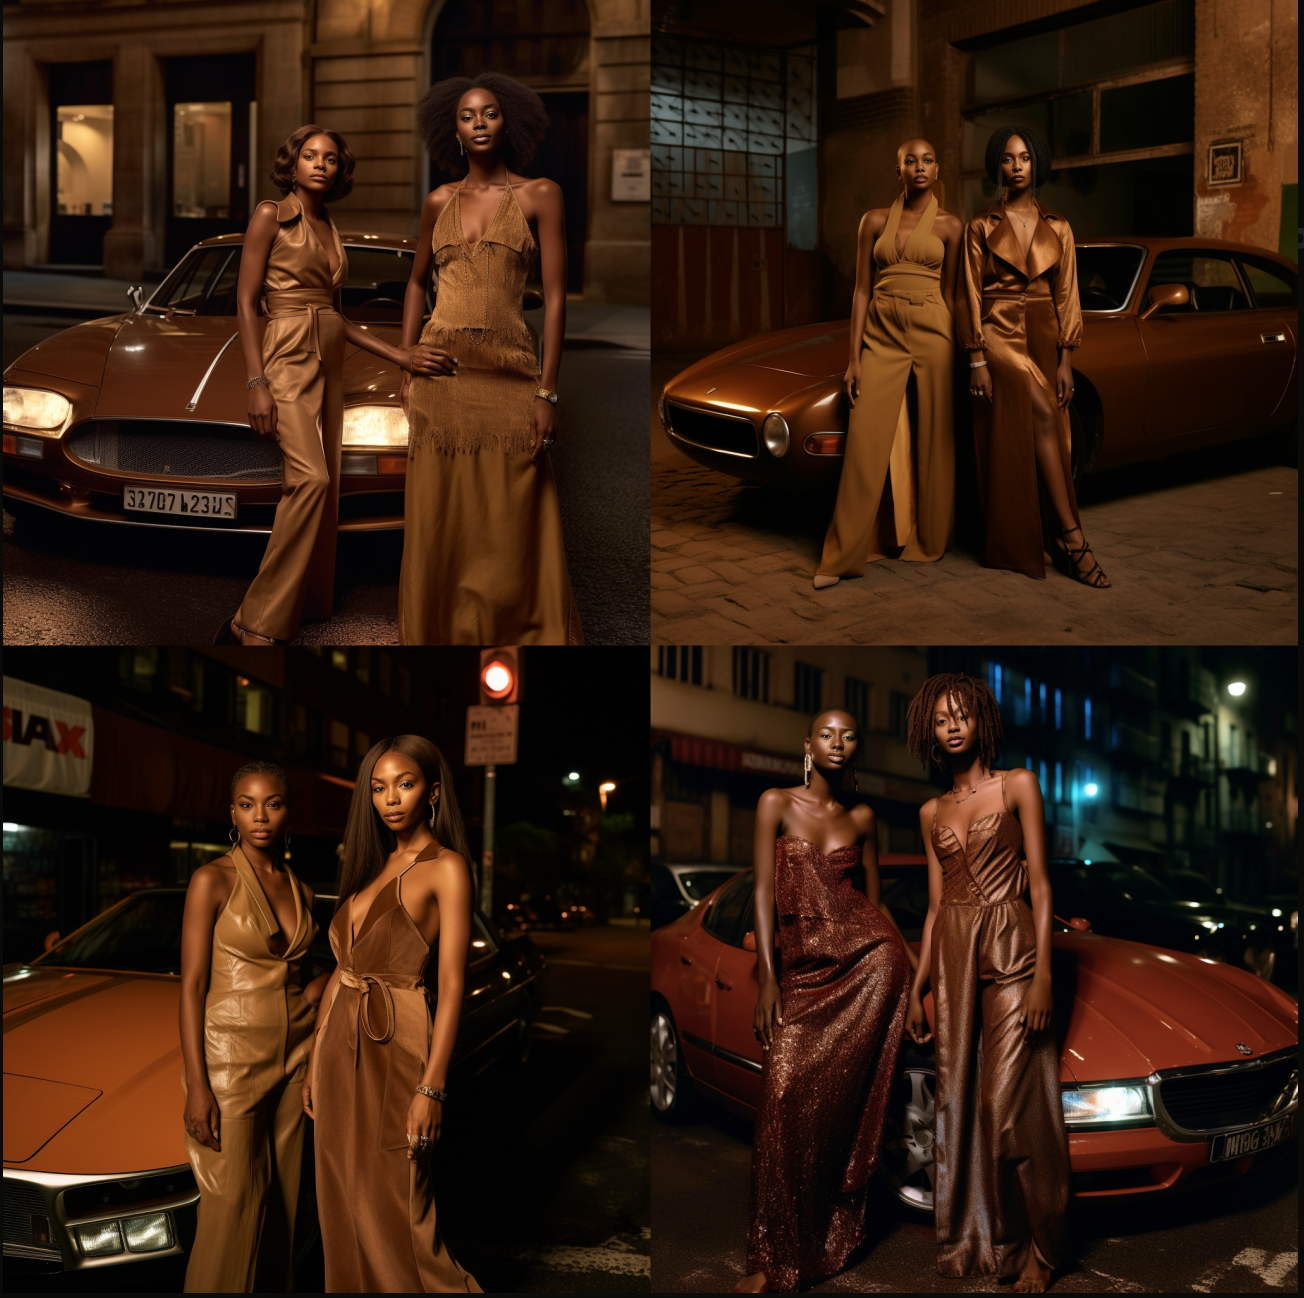 fashion photography of two african models in brown dresses next to a brown sportscar by night